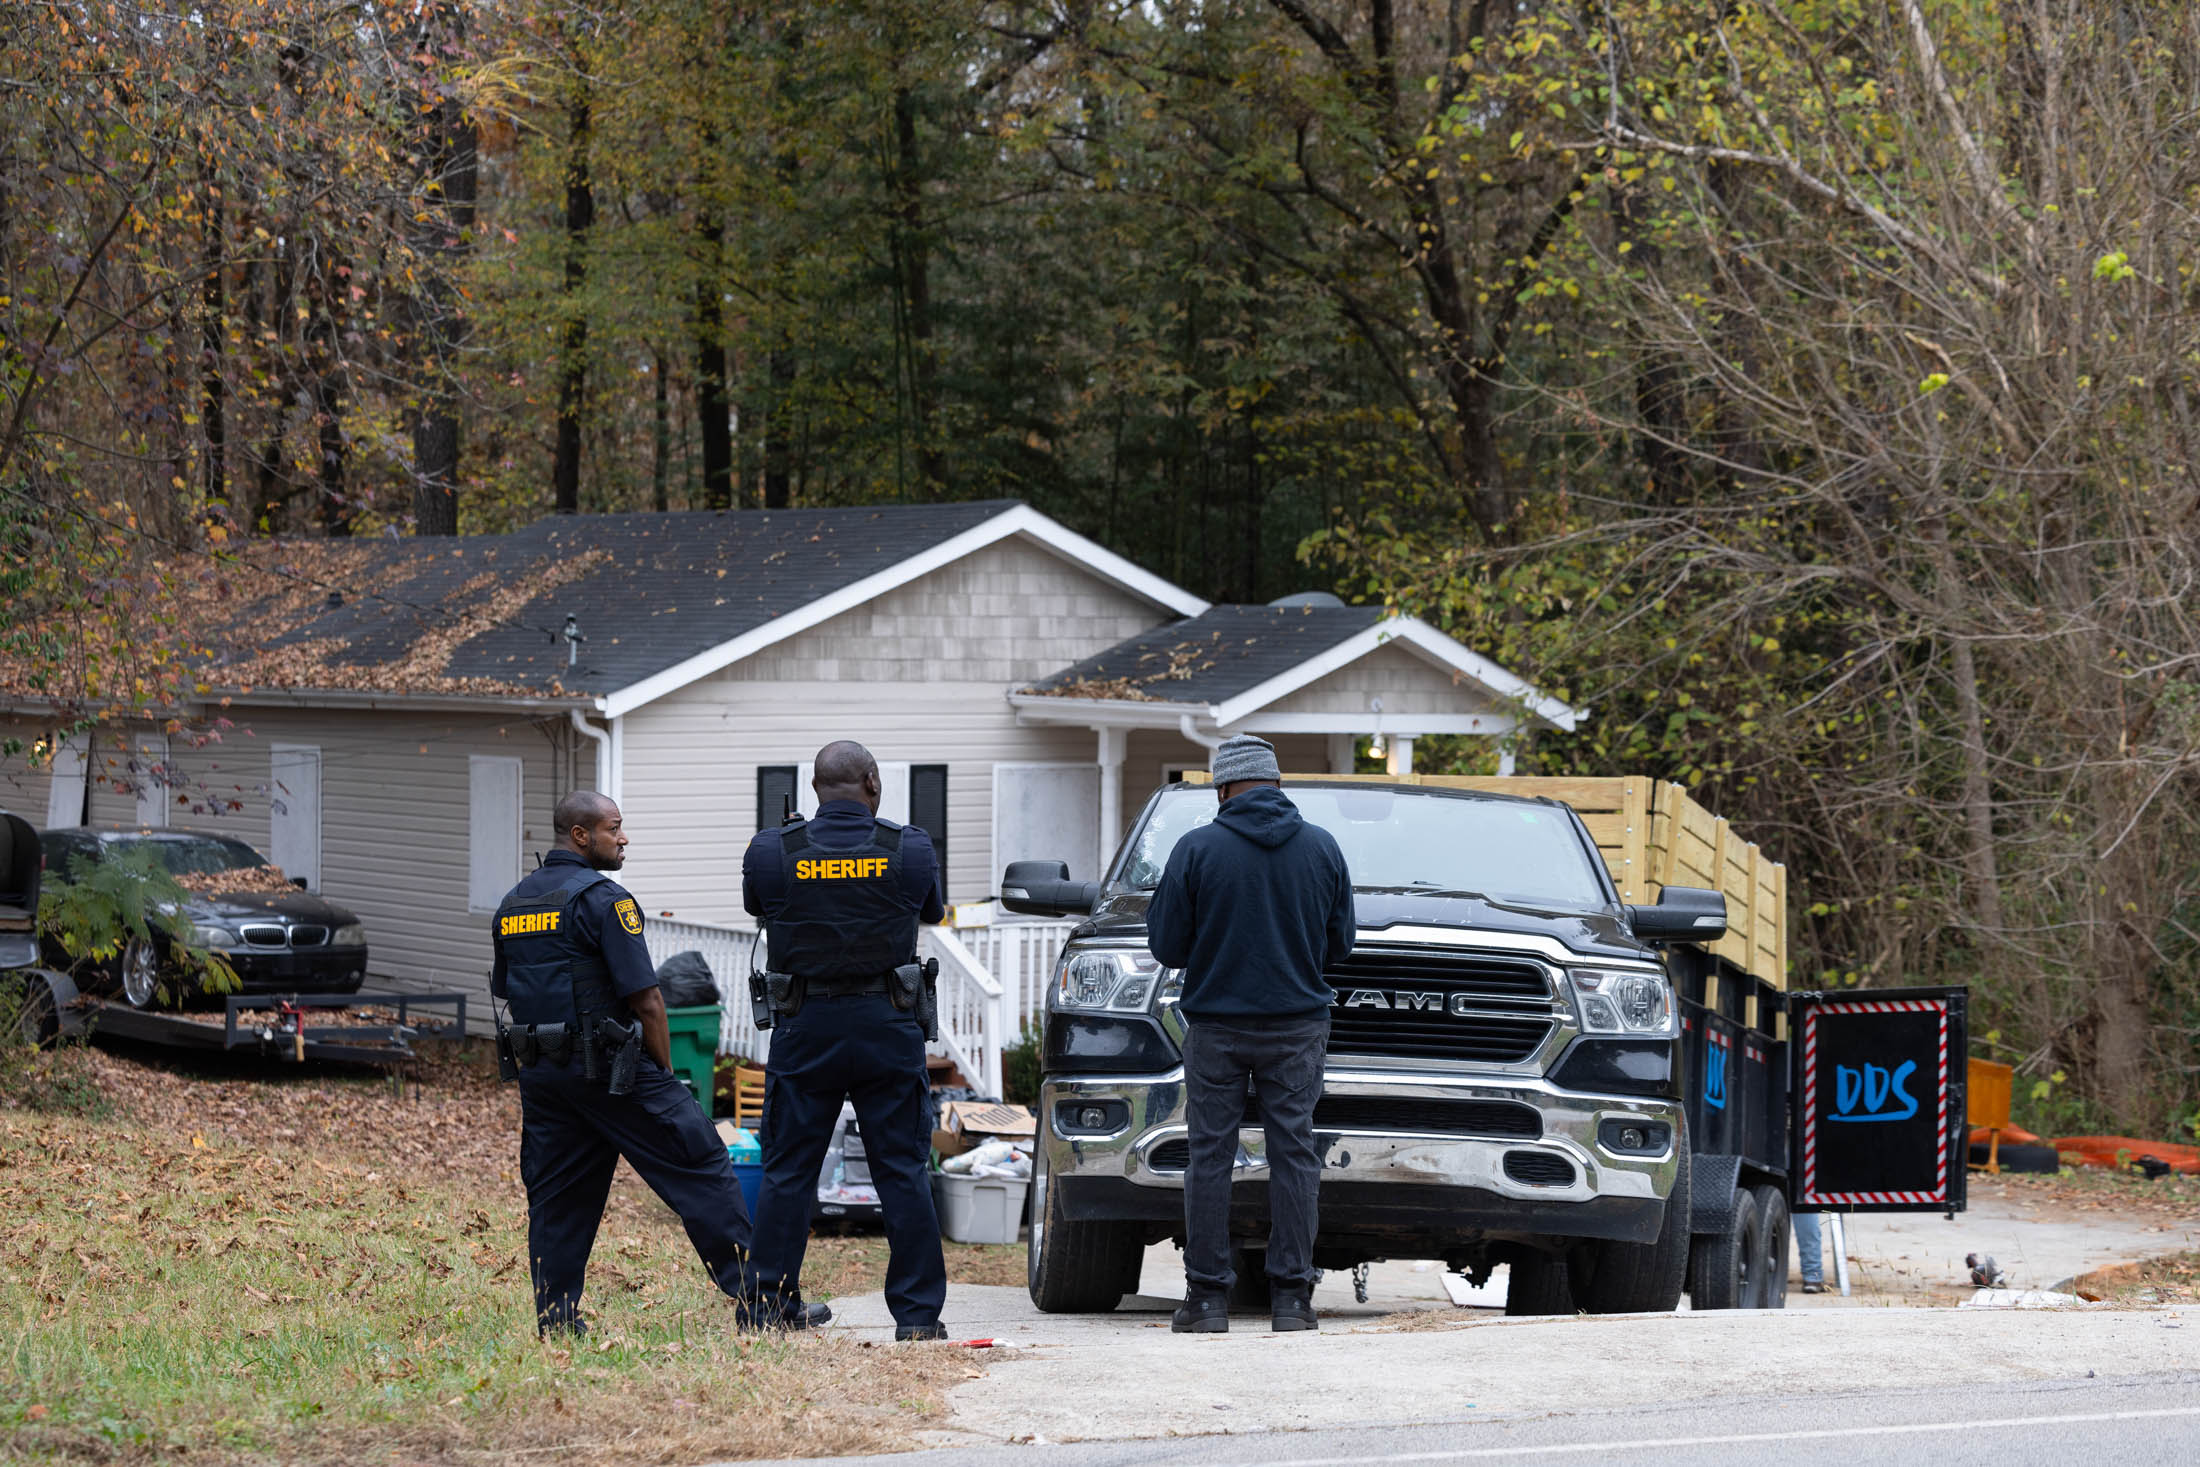 Sheriff's deputies supervise the removal of squatters’ belongings&nbsp;from a property in Ellenwood, Georgia, on Nov. 17.